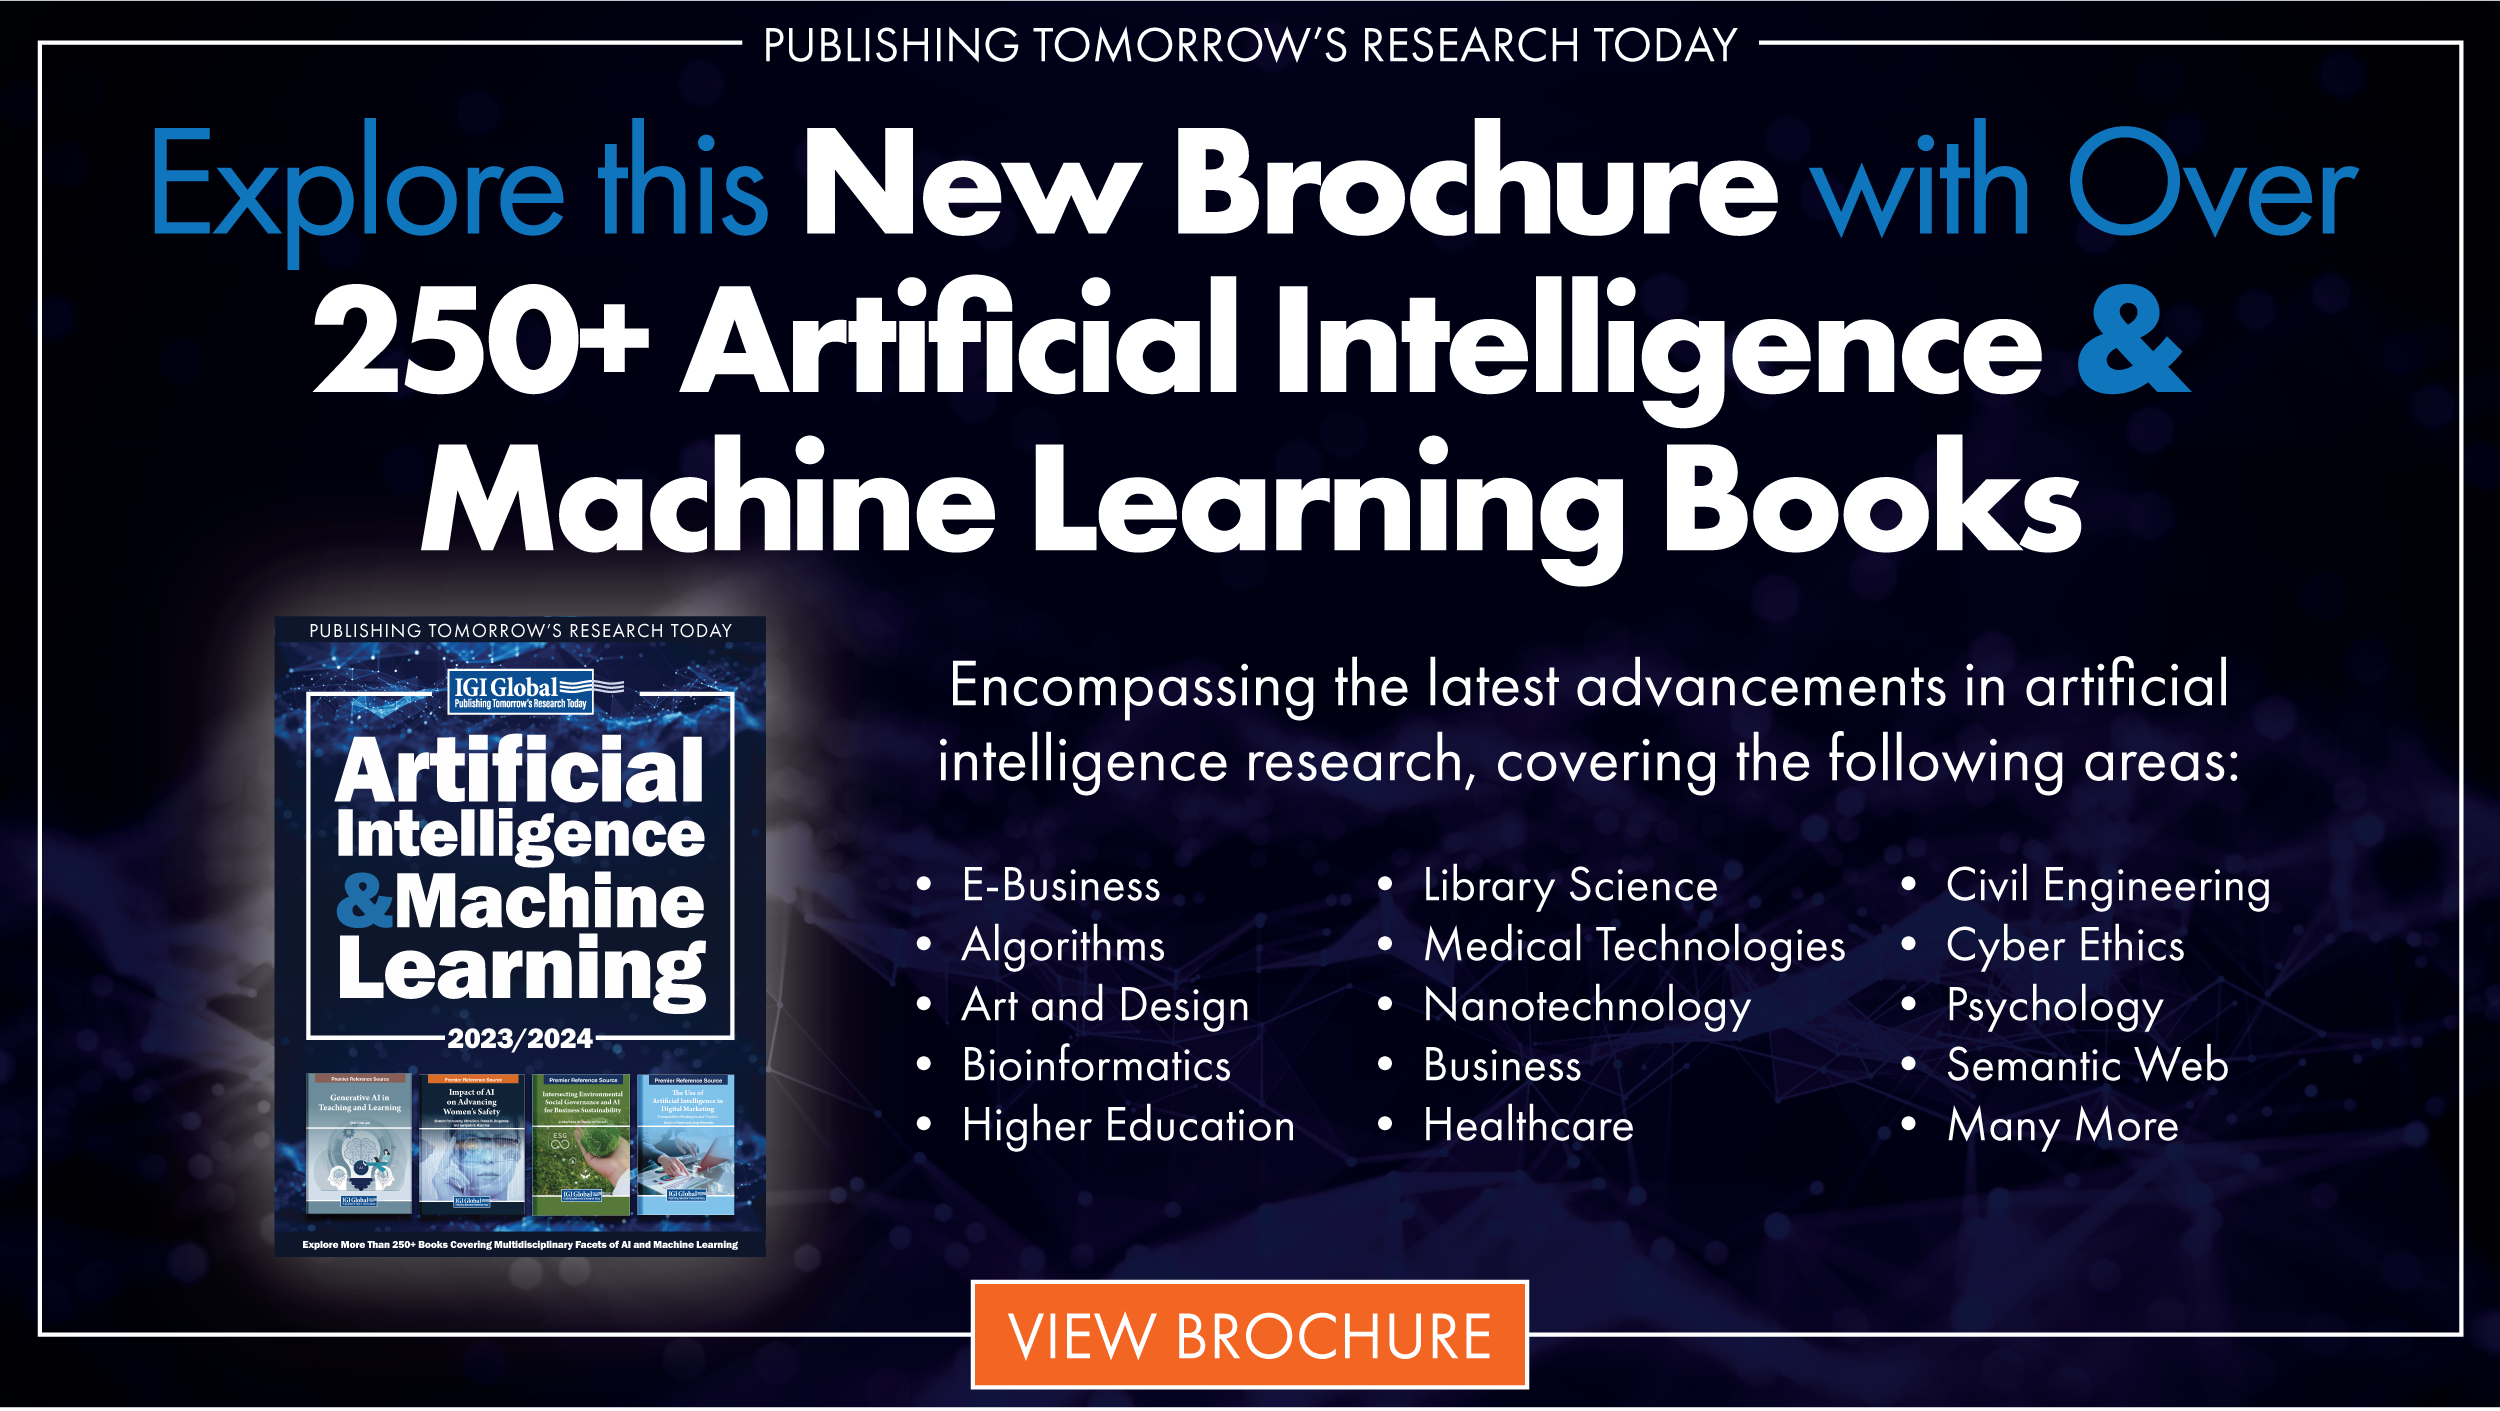 Transform your library into a wealth of knowledge on all things Artificial Intelligence and Machine Learning. Empower students and faculty to prepare for a future filled with cutting edge technology that is seeping into every corner of society.